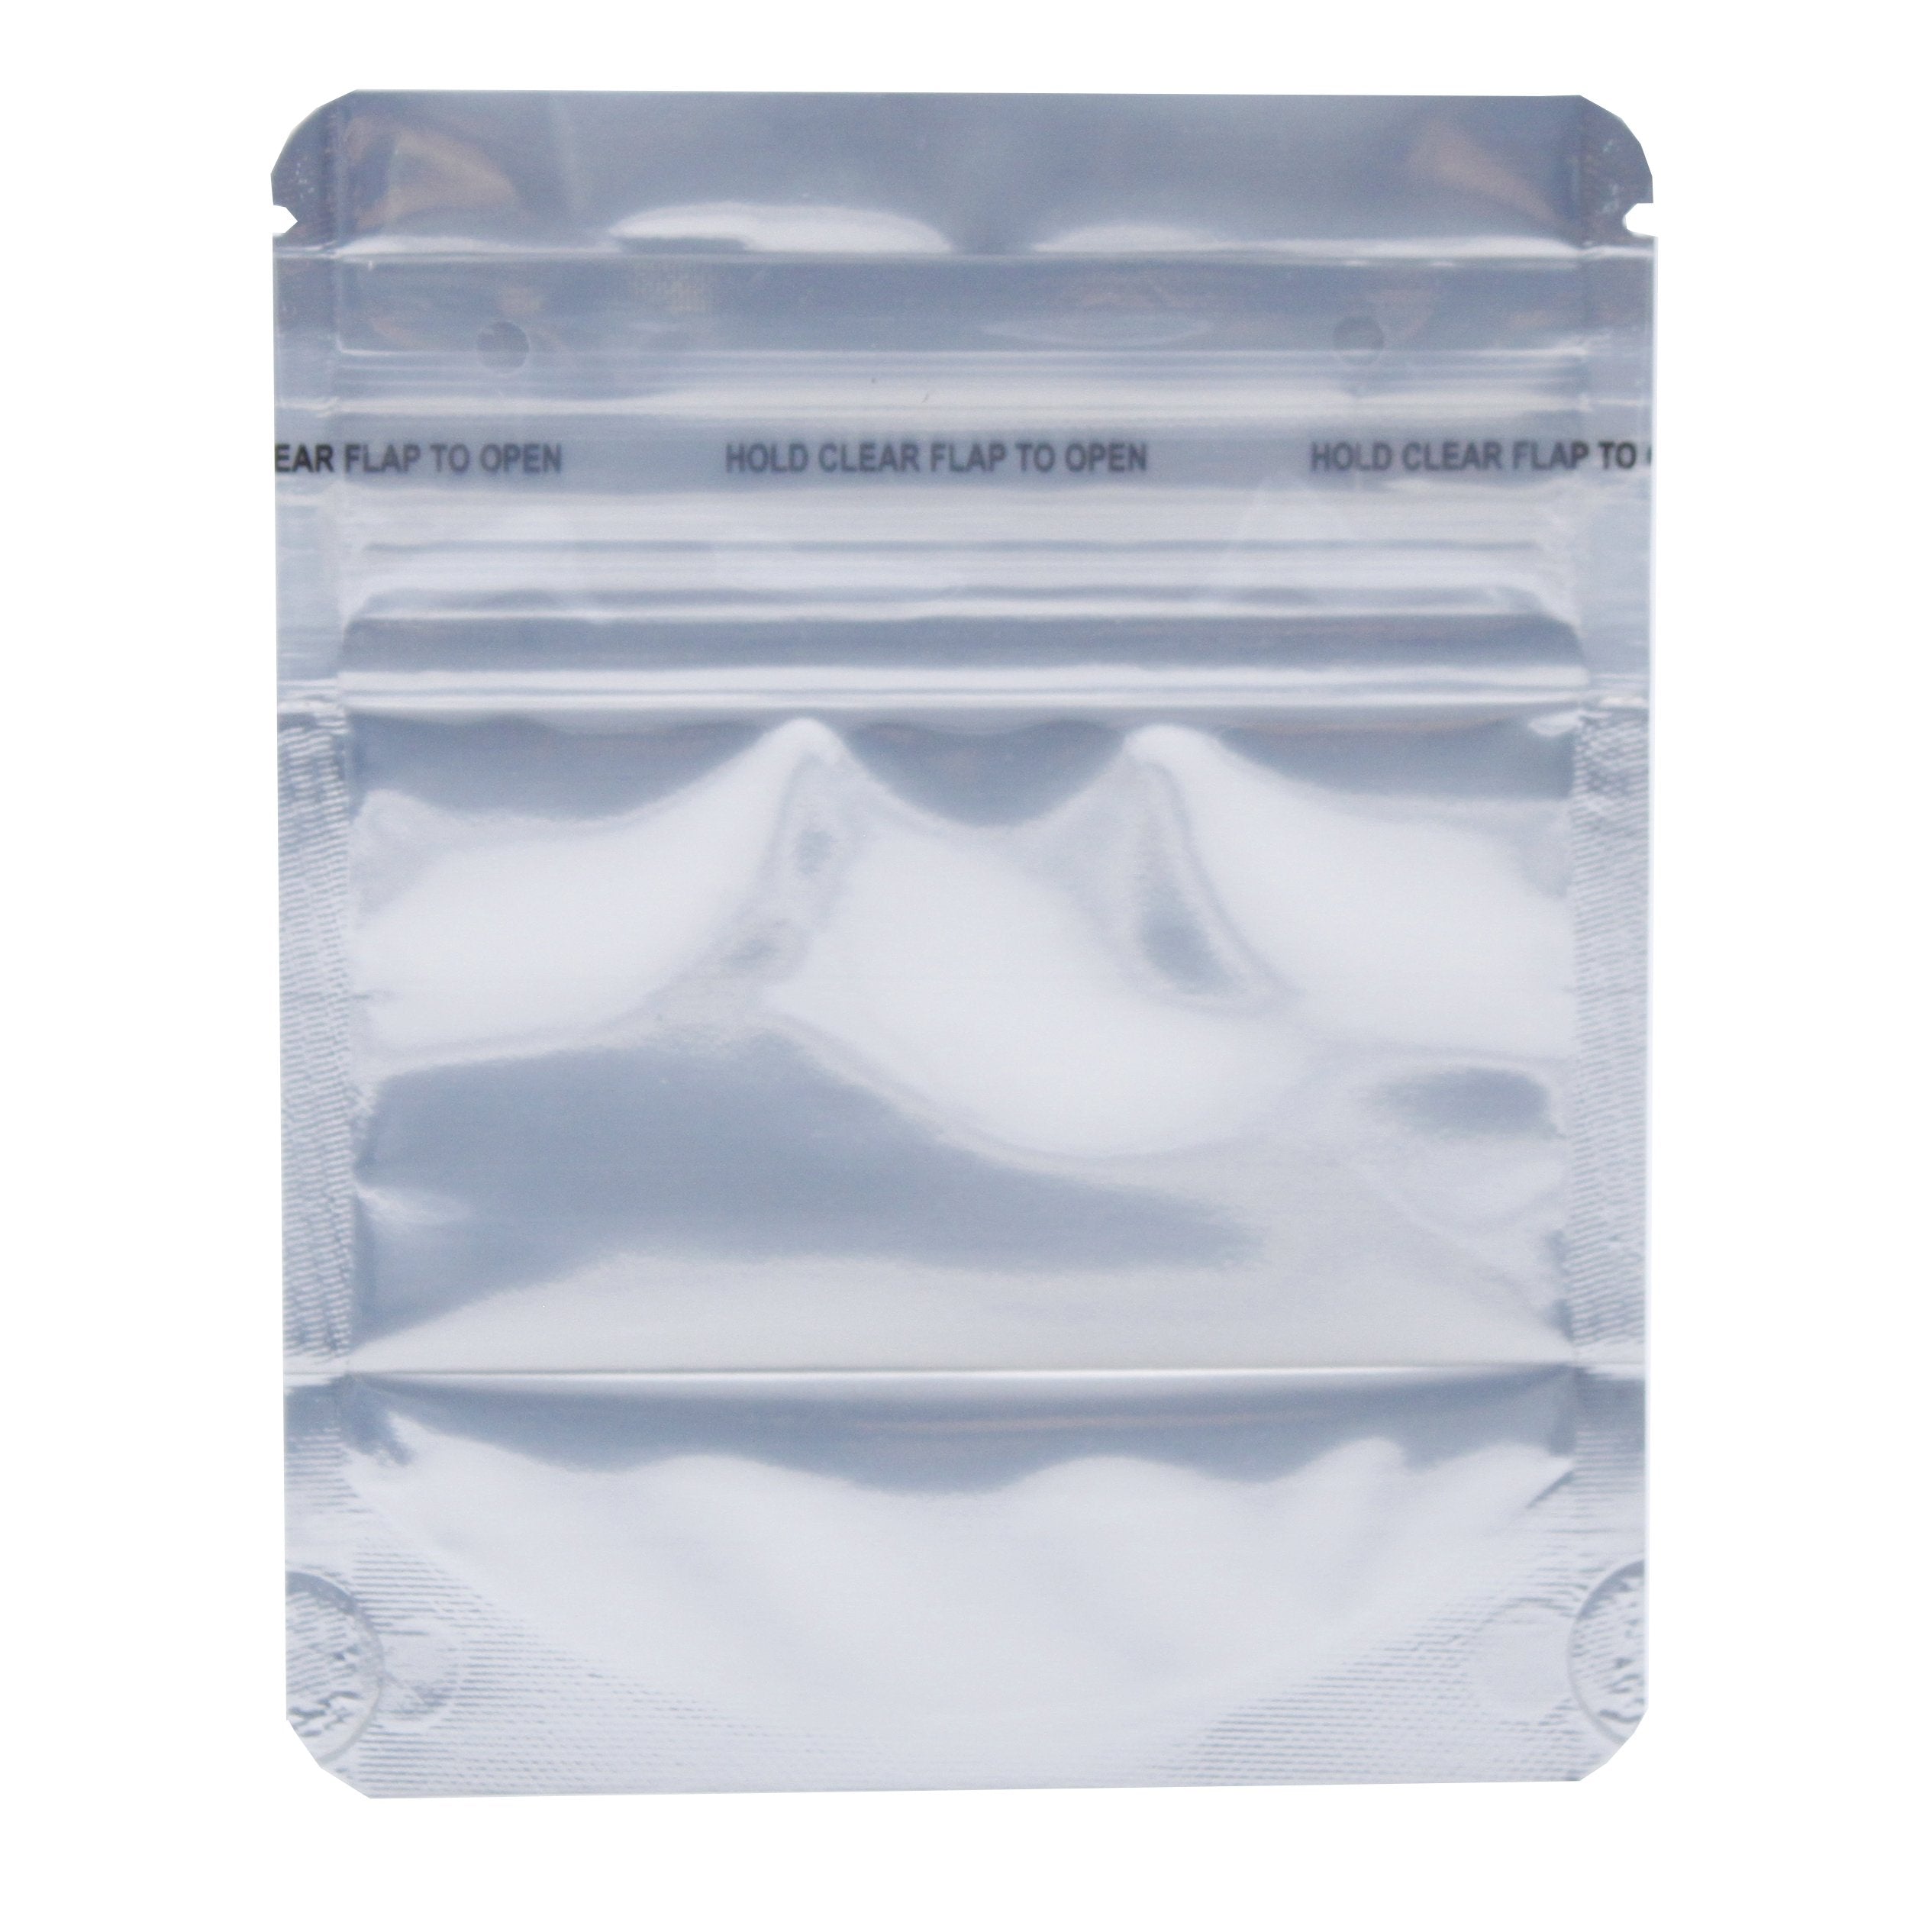 Bag King Child-Resistant Clear Front Wide Mouth Bag (1/8th oz) 3.9" x 4.9"